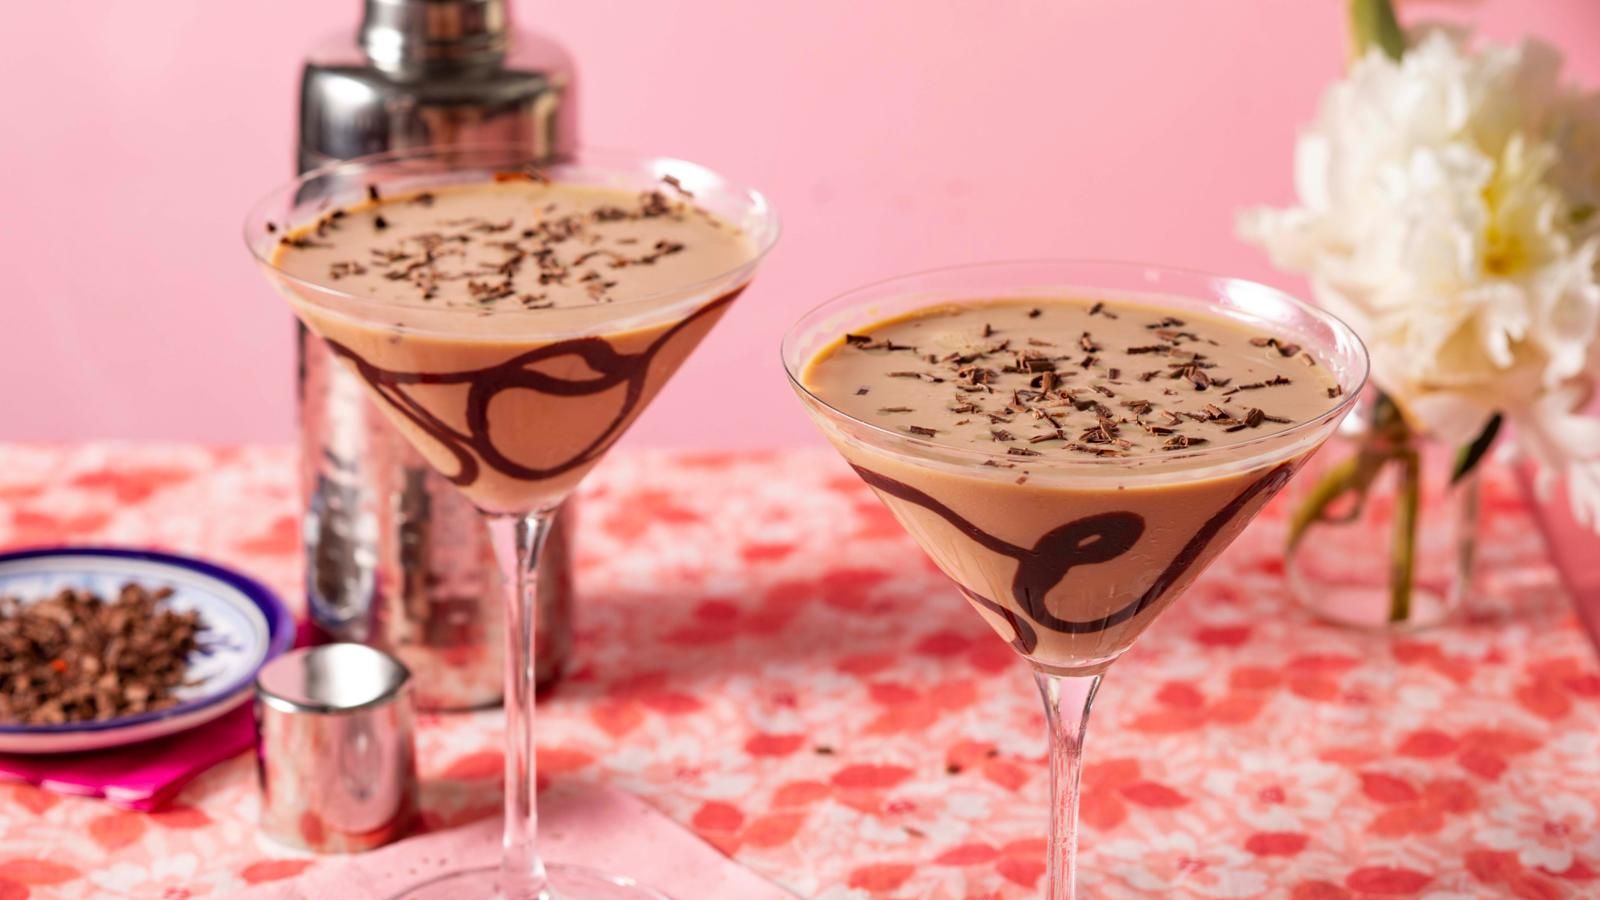 Baileys' New Chocolate Liqueur Is Dessert In A Glass—Here's How To Use It  In A Martini